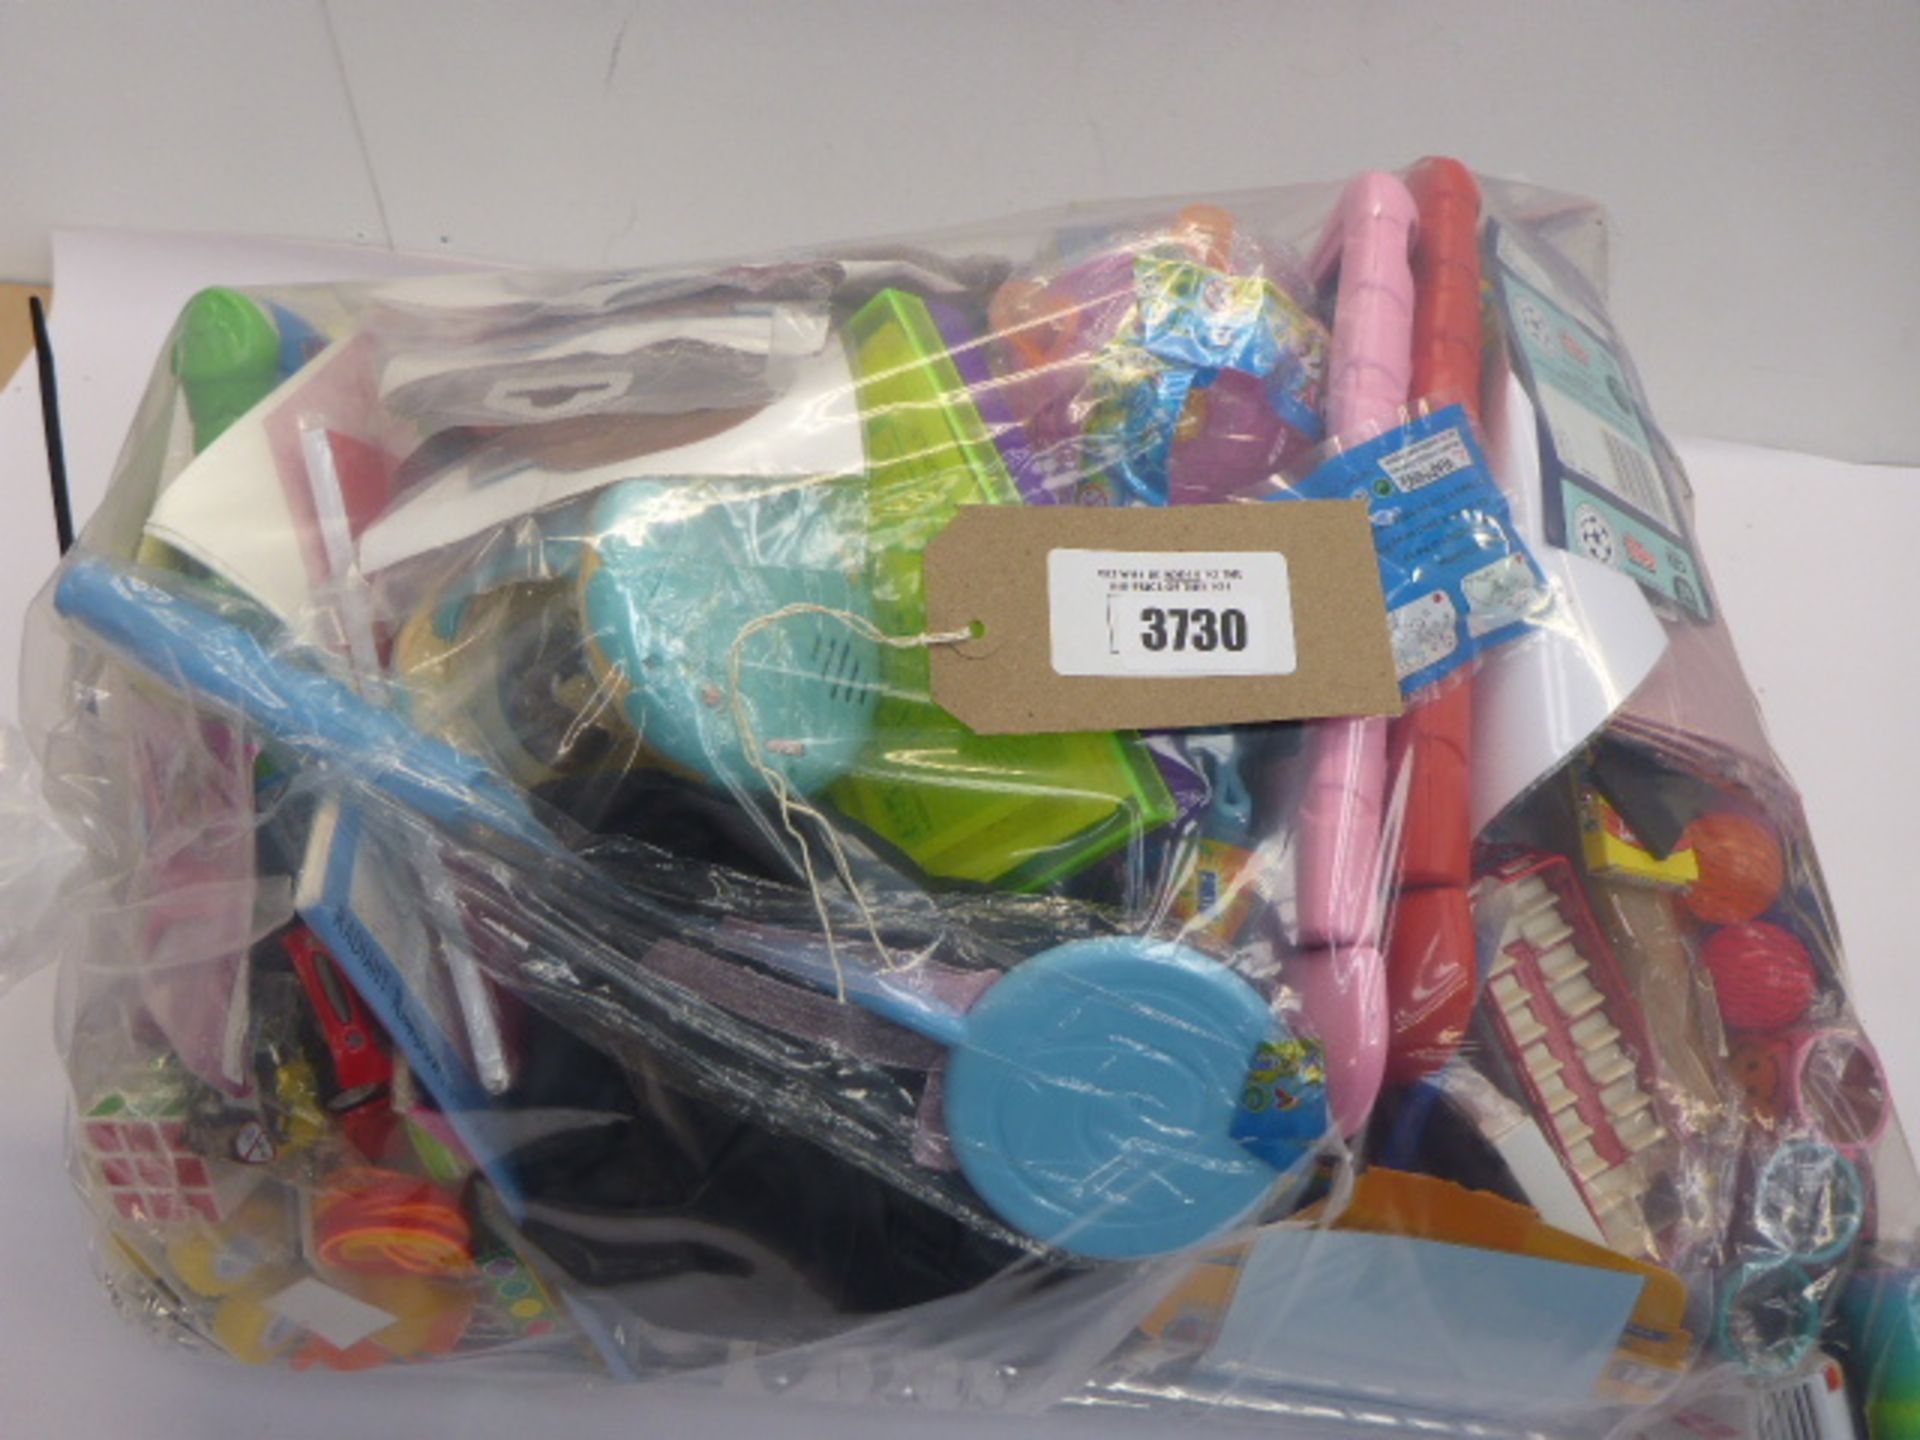 Large bag of novelty toys including Trading cards, bouncy balls, iPad covers, Hot Wheel cars,